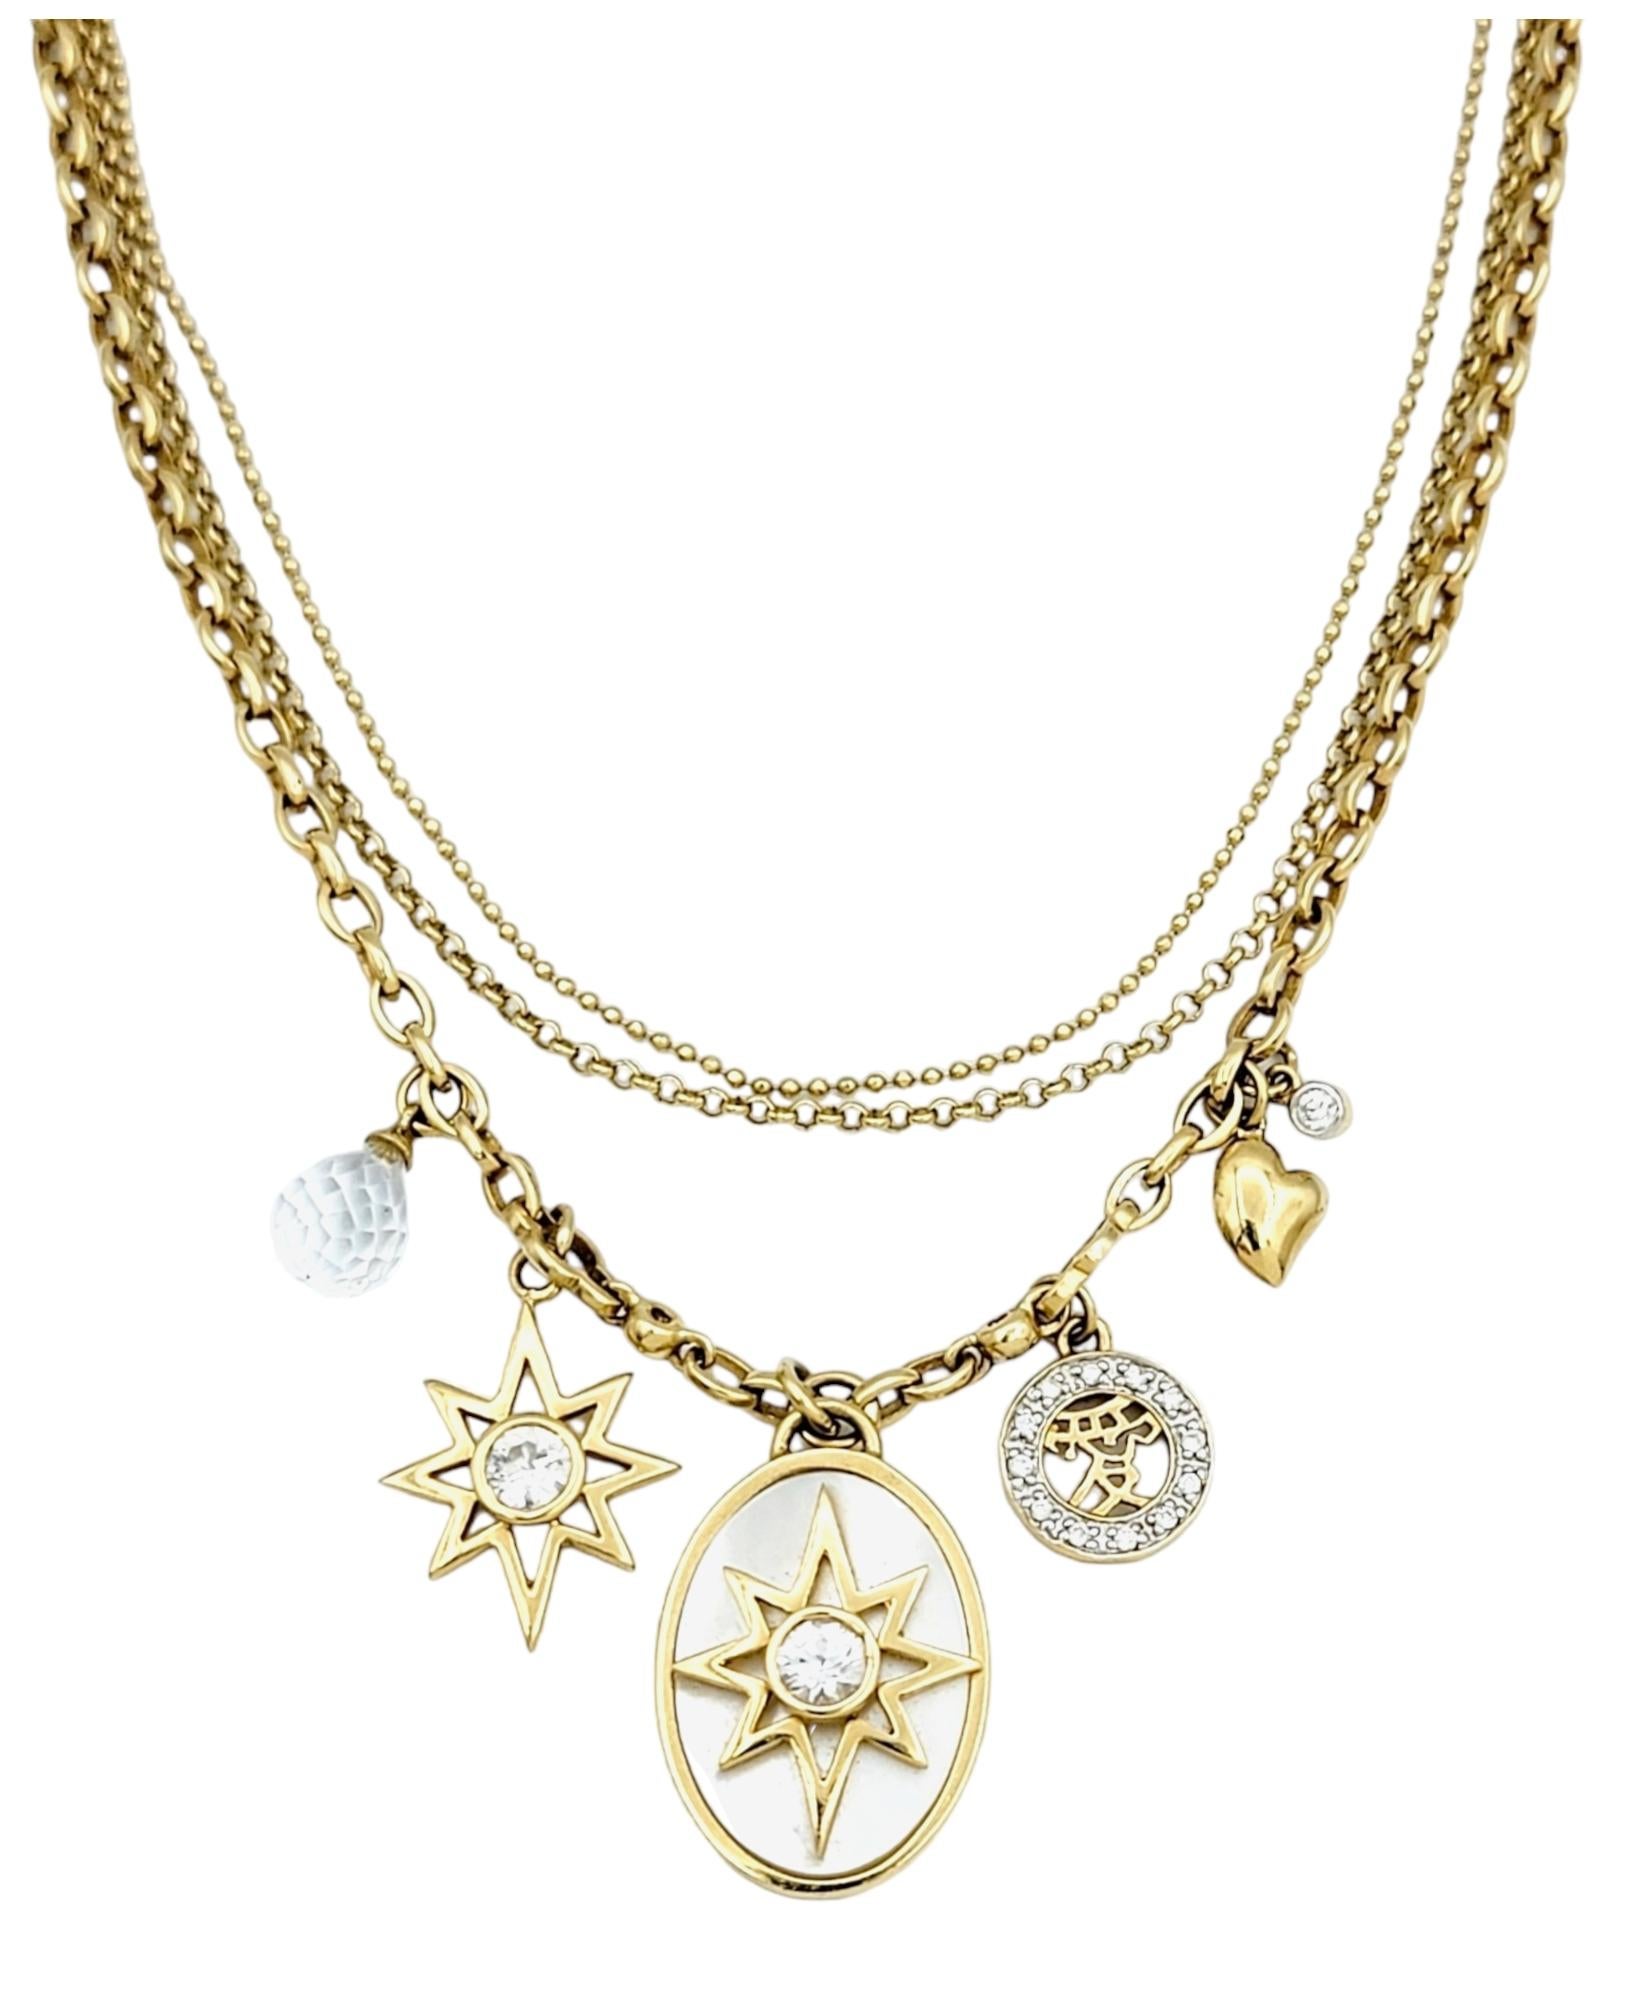 This wonderfully designed multi-chain layered charm necklace by M2 by Mary Margrill is sure to become one of your new favorite pieces.  This exquisitely crafted necklace is a stunning blend of textures, tones, and gemstones, culminating in a